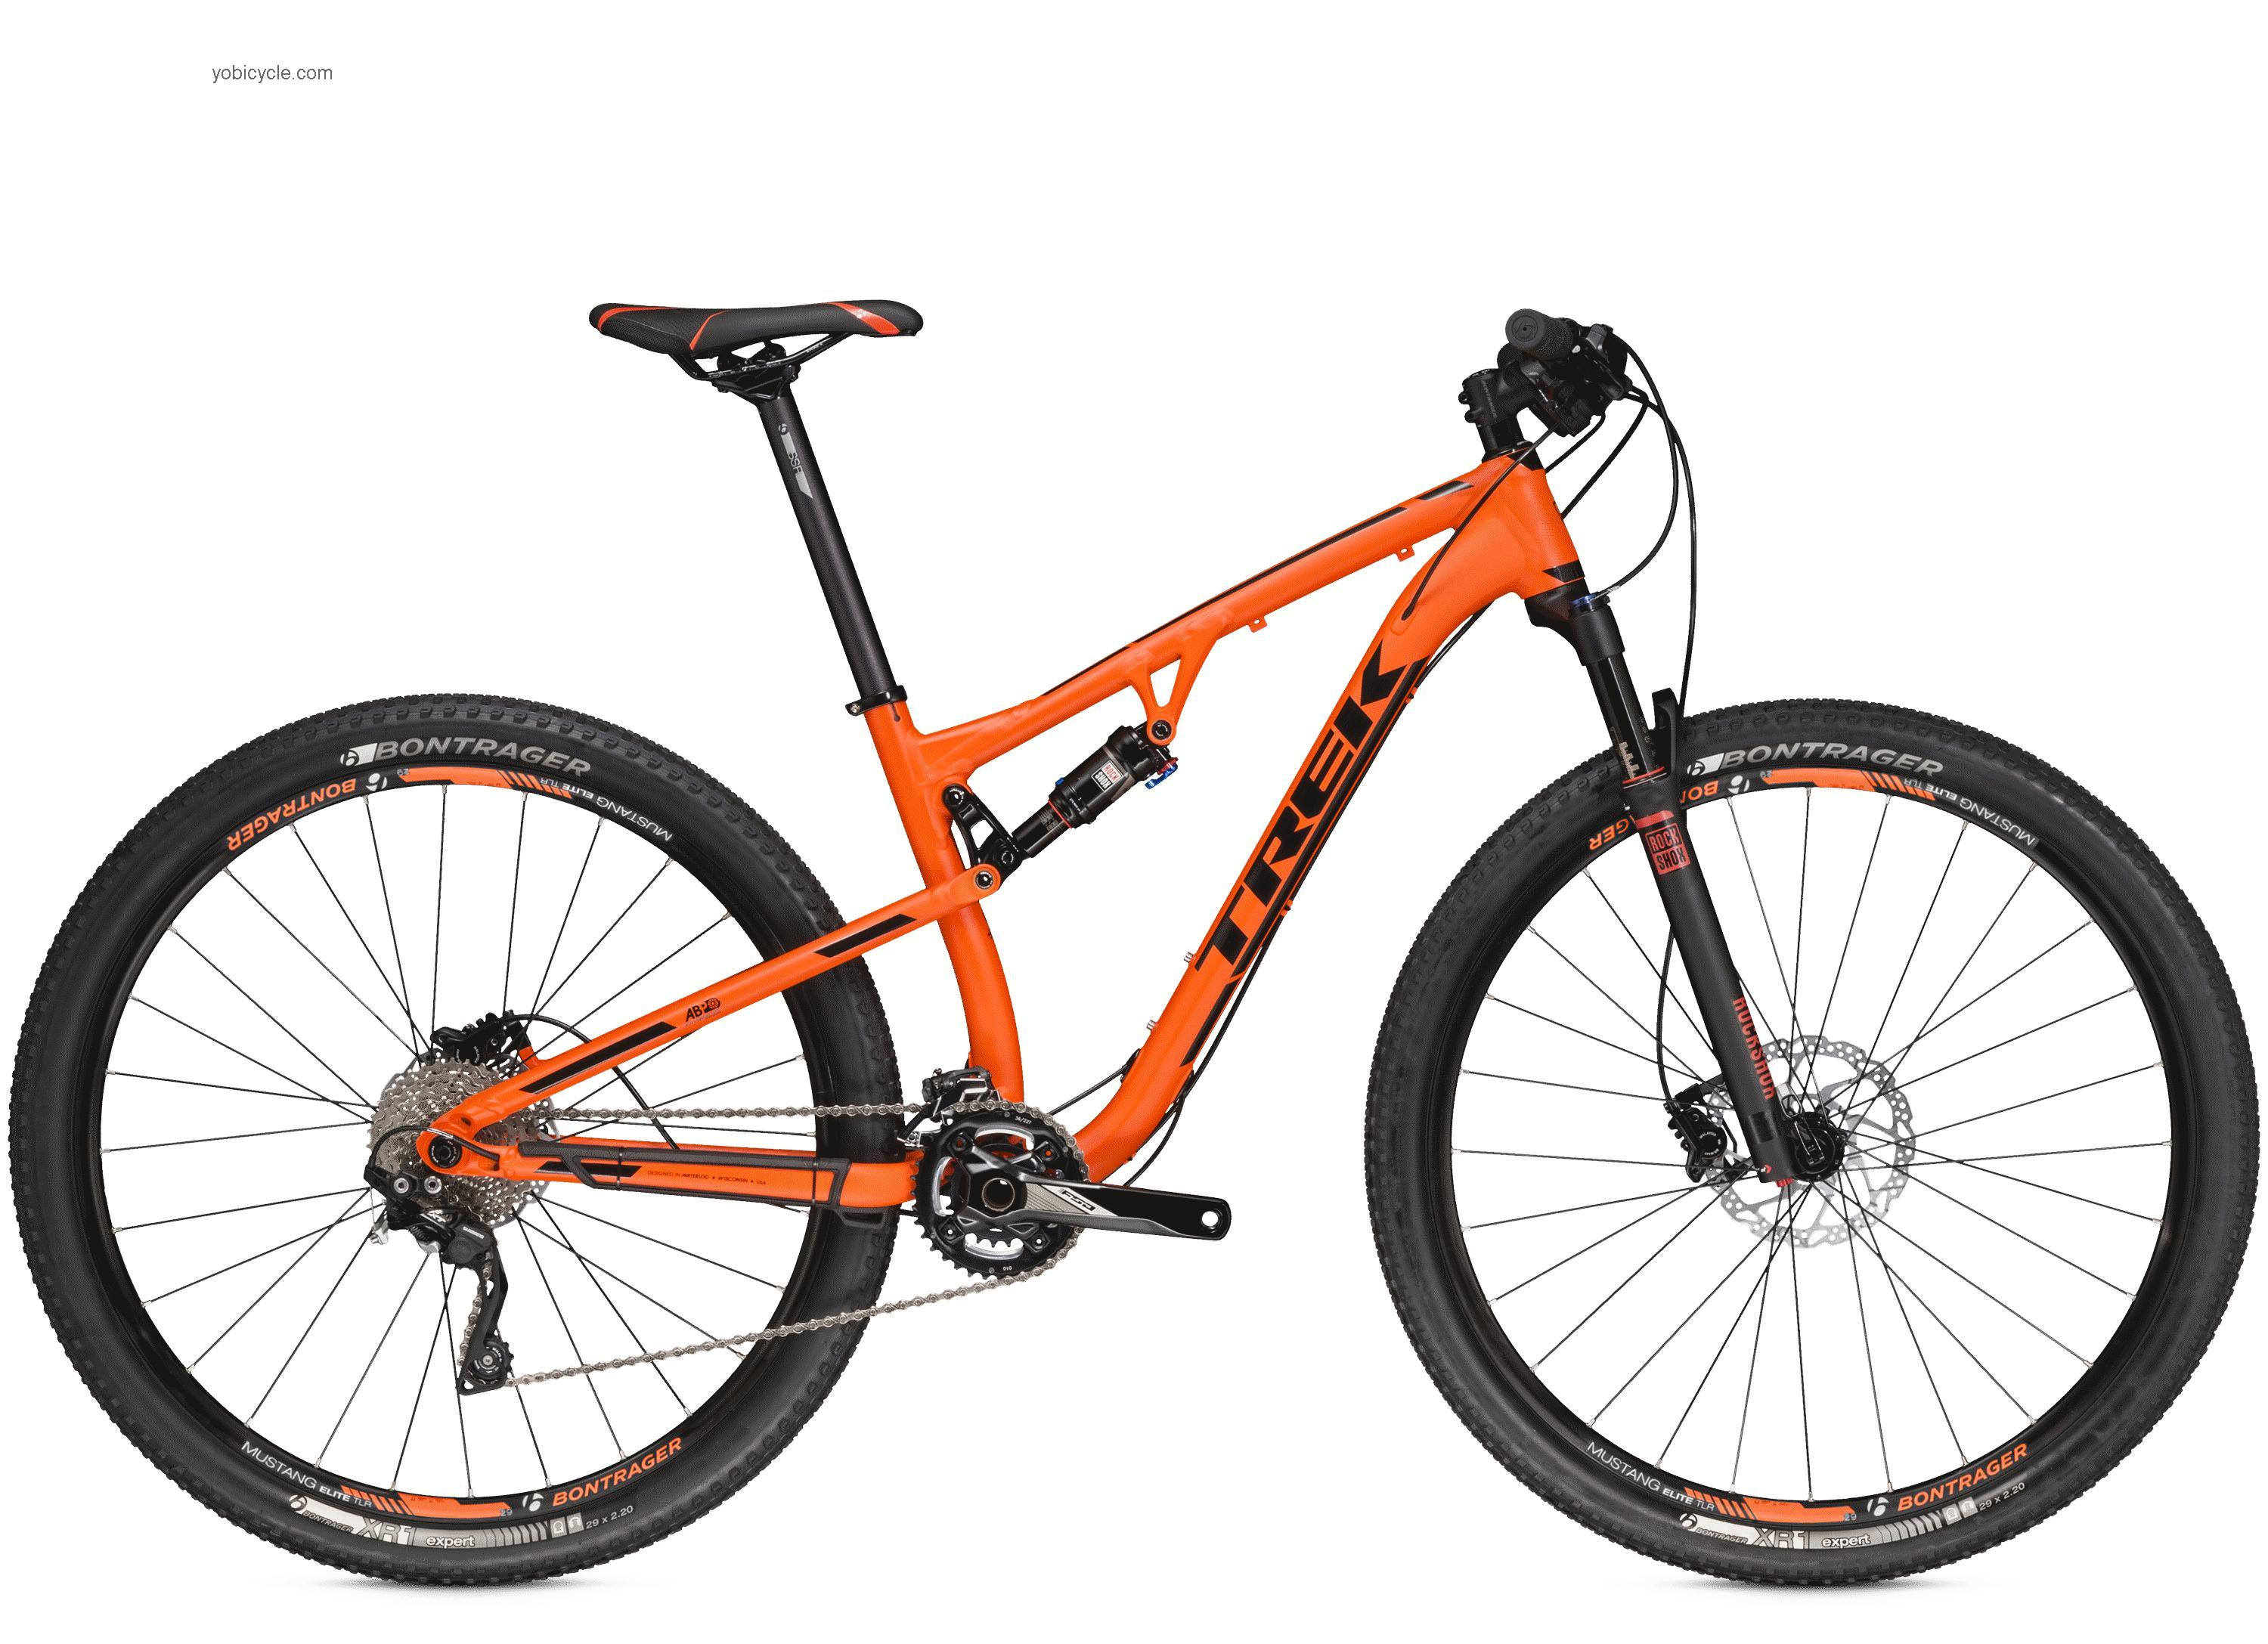 Trek Superfly FS 7 2015 comparison online with competitors